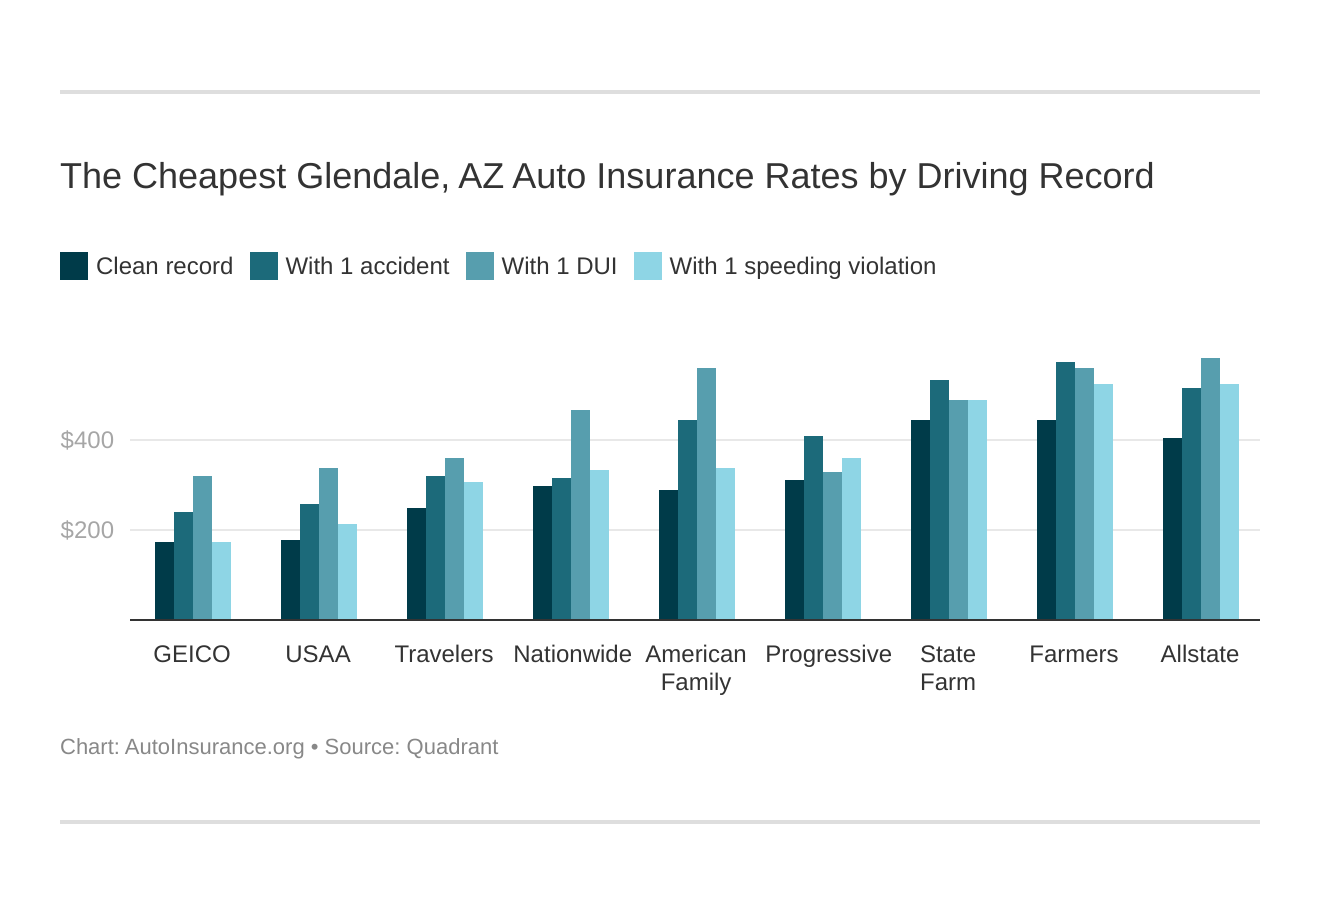 The Cheapest Glendale, AZ Auto Insurance Rates by Driving Record